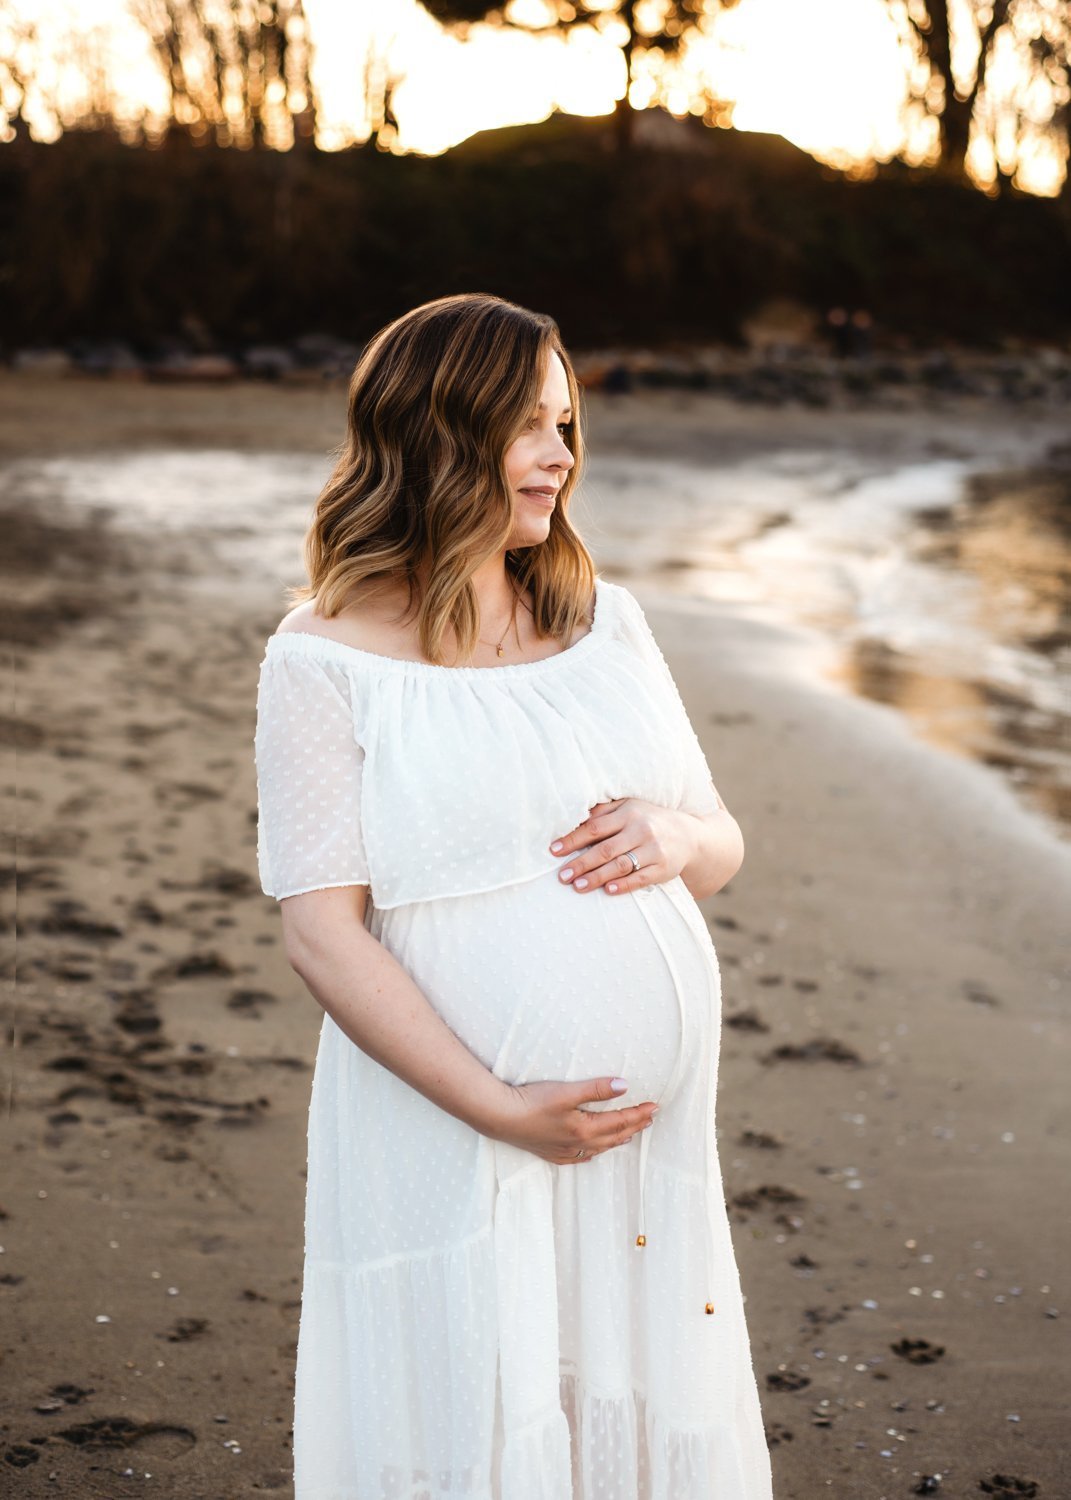 Outdoor Maternity Session Dress